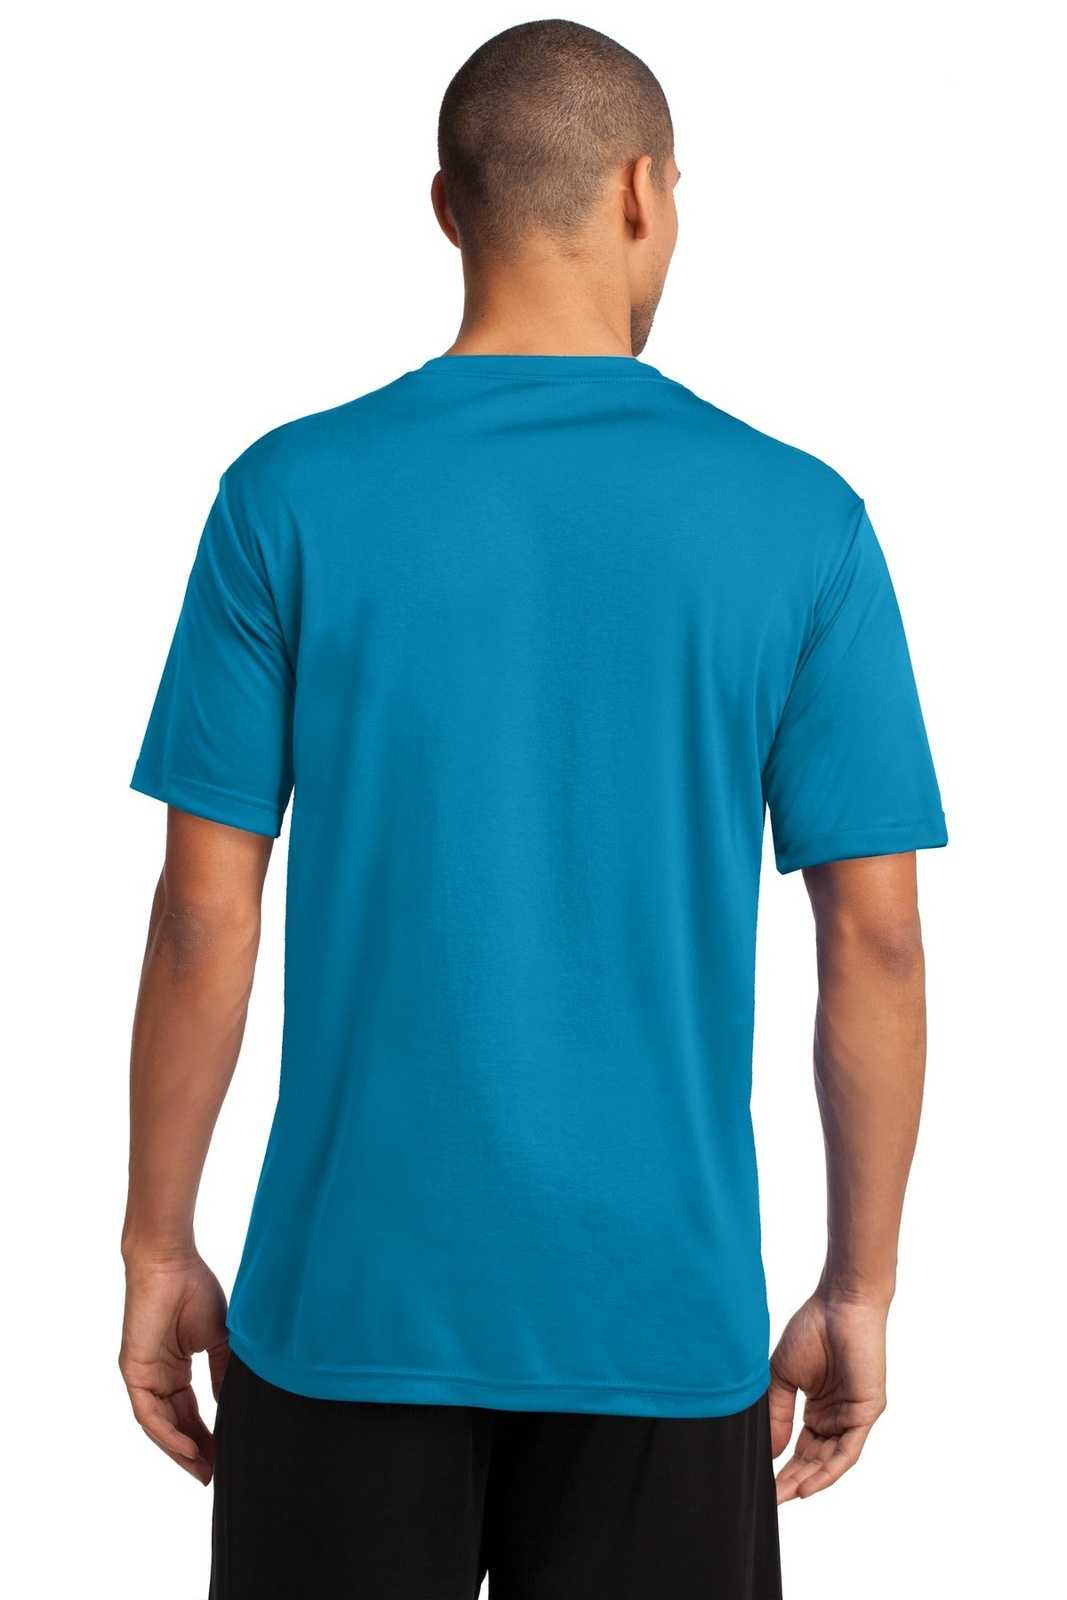 Port & Company PC380 Performance Tee - Neon Blue - HIT a Double - 1